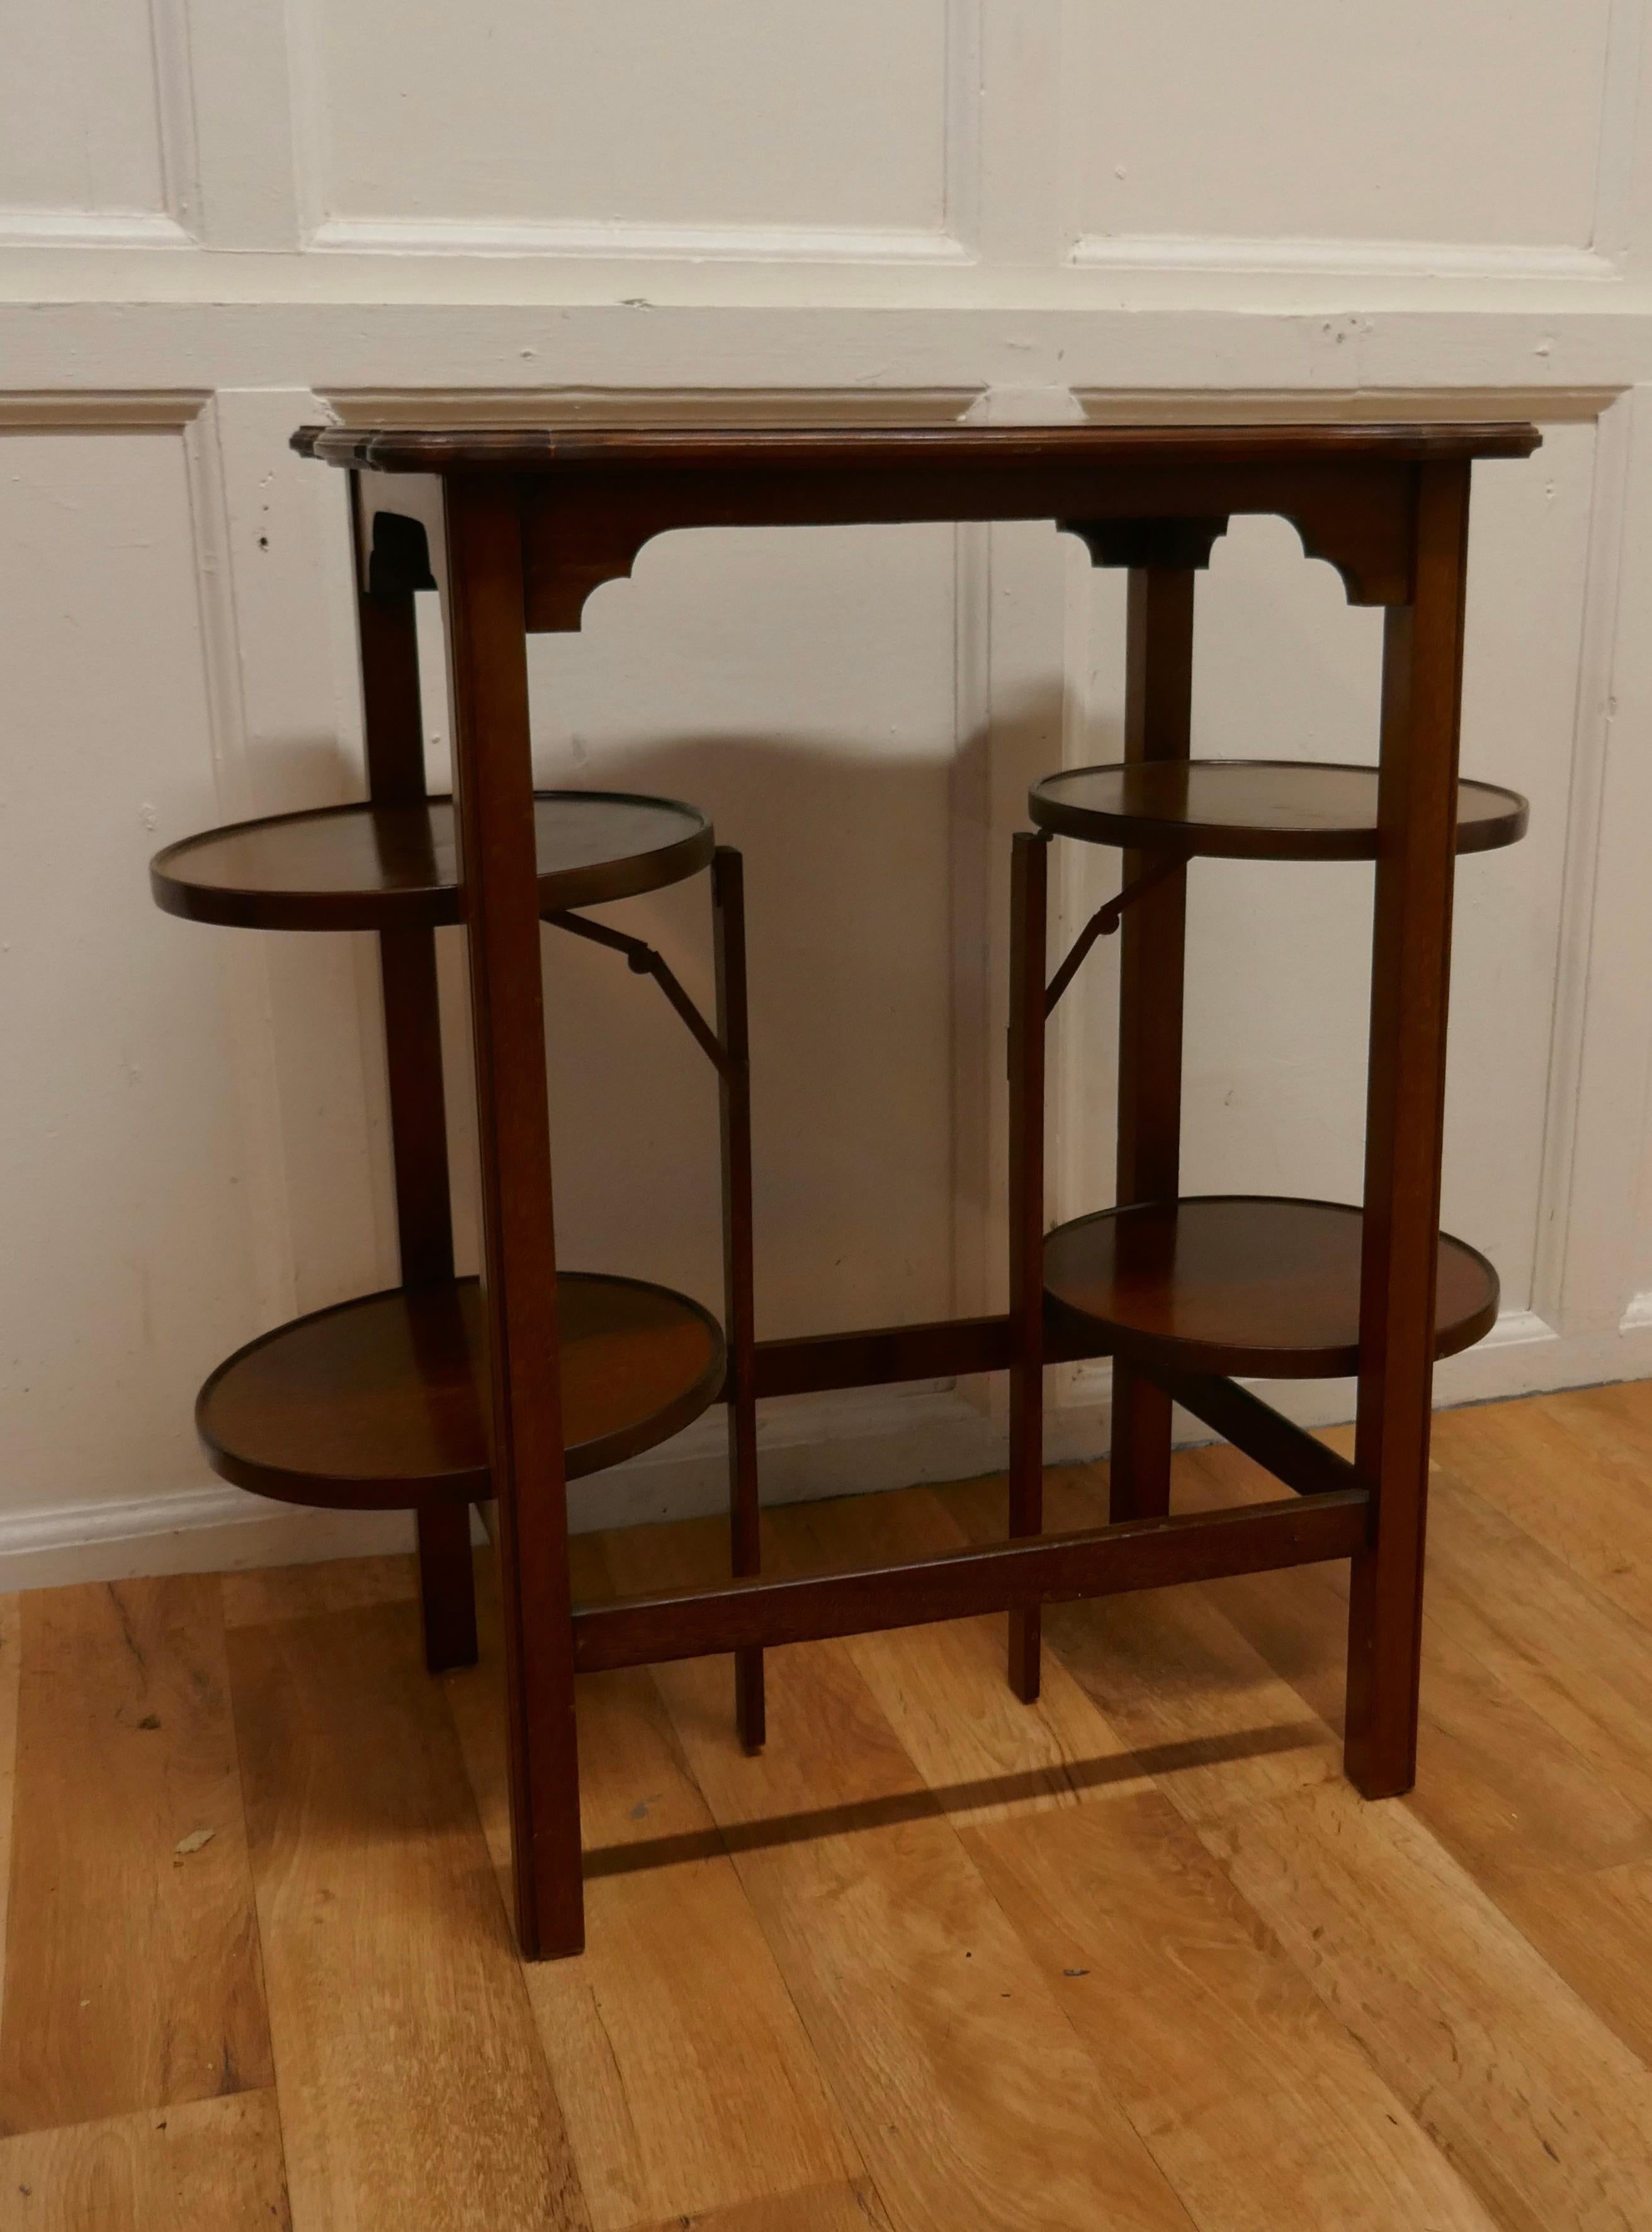 A 4 Tray Mahogany Table Cake Stand or Dumb Waiter 

A charming and unusual piece is in good condition, it is a central rectangular table with a scalloped edge which has 2 round cake trays which fold out from both sides
The stand is in excellent